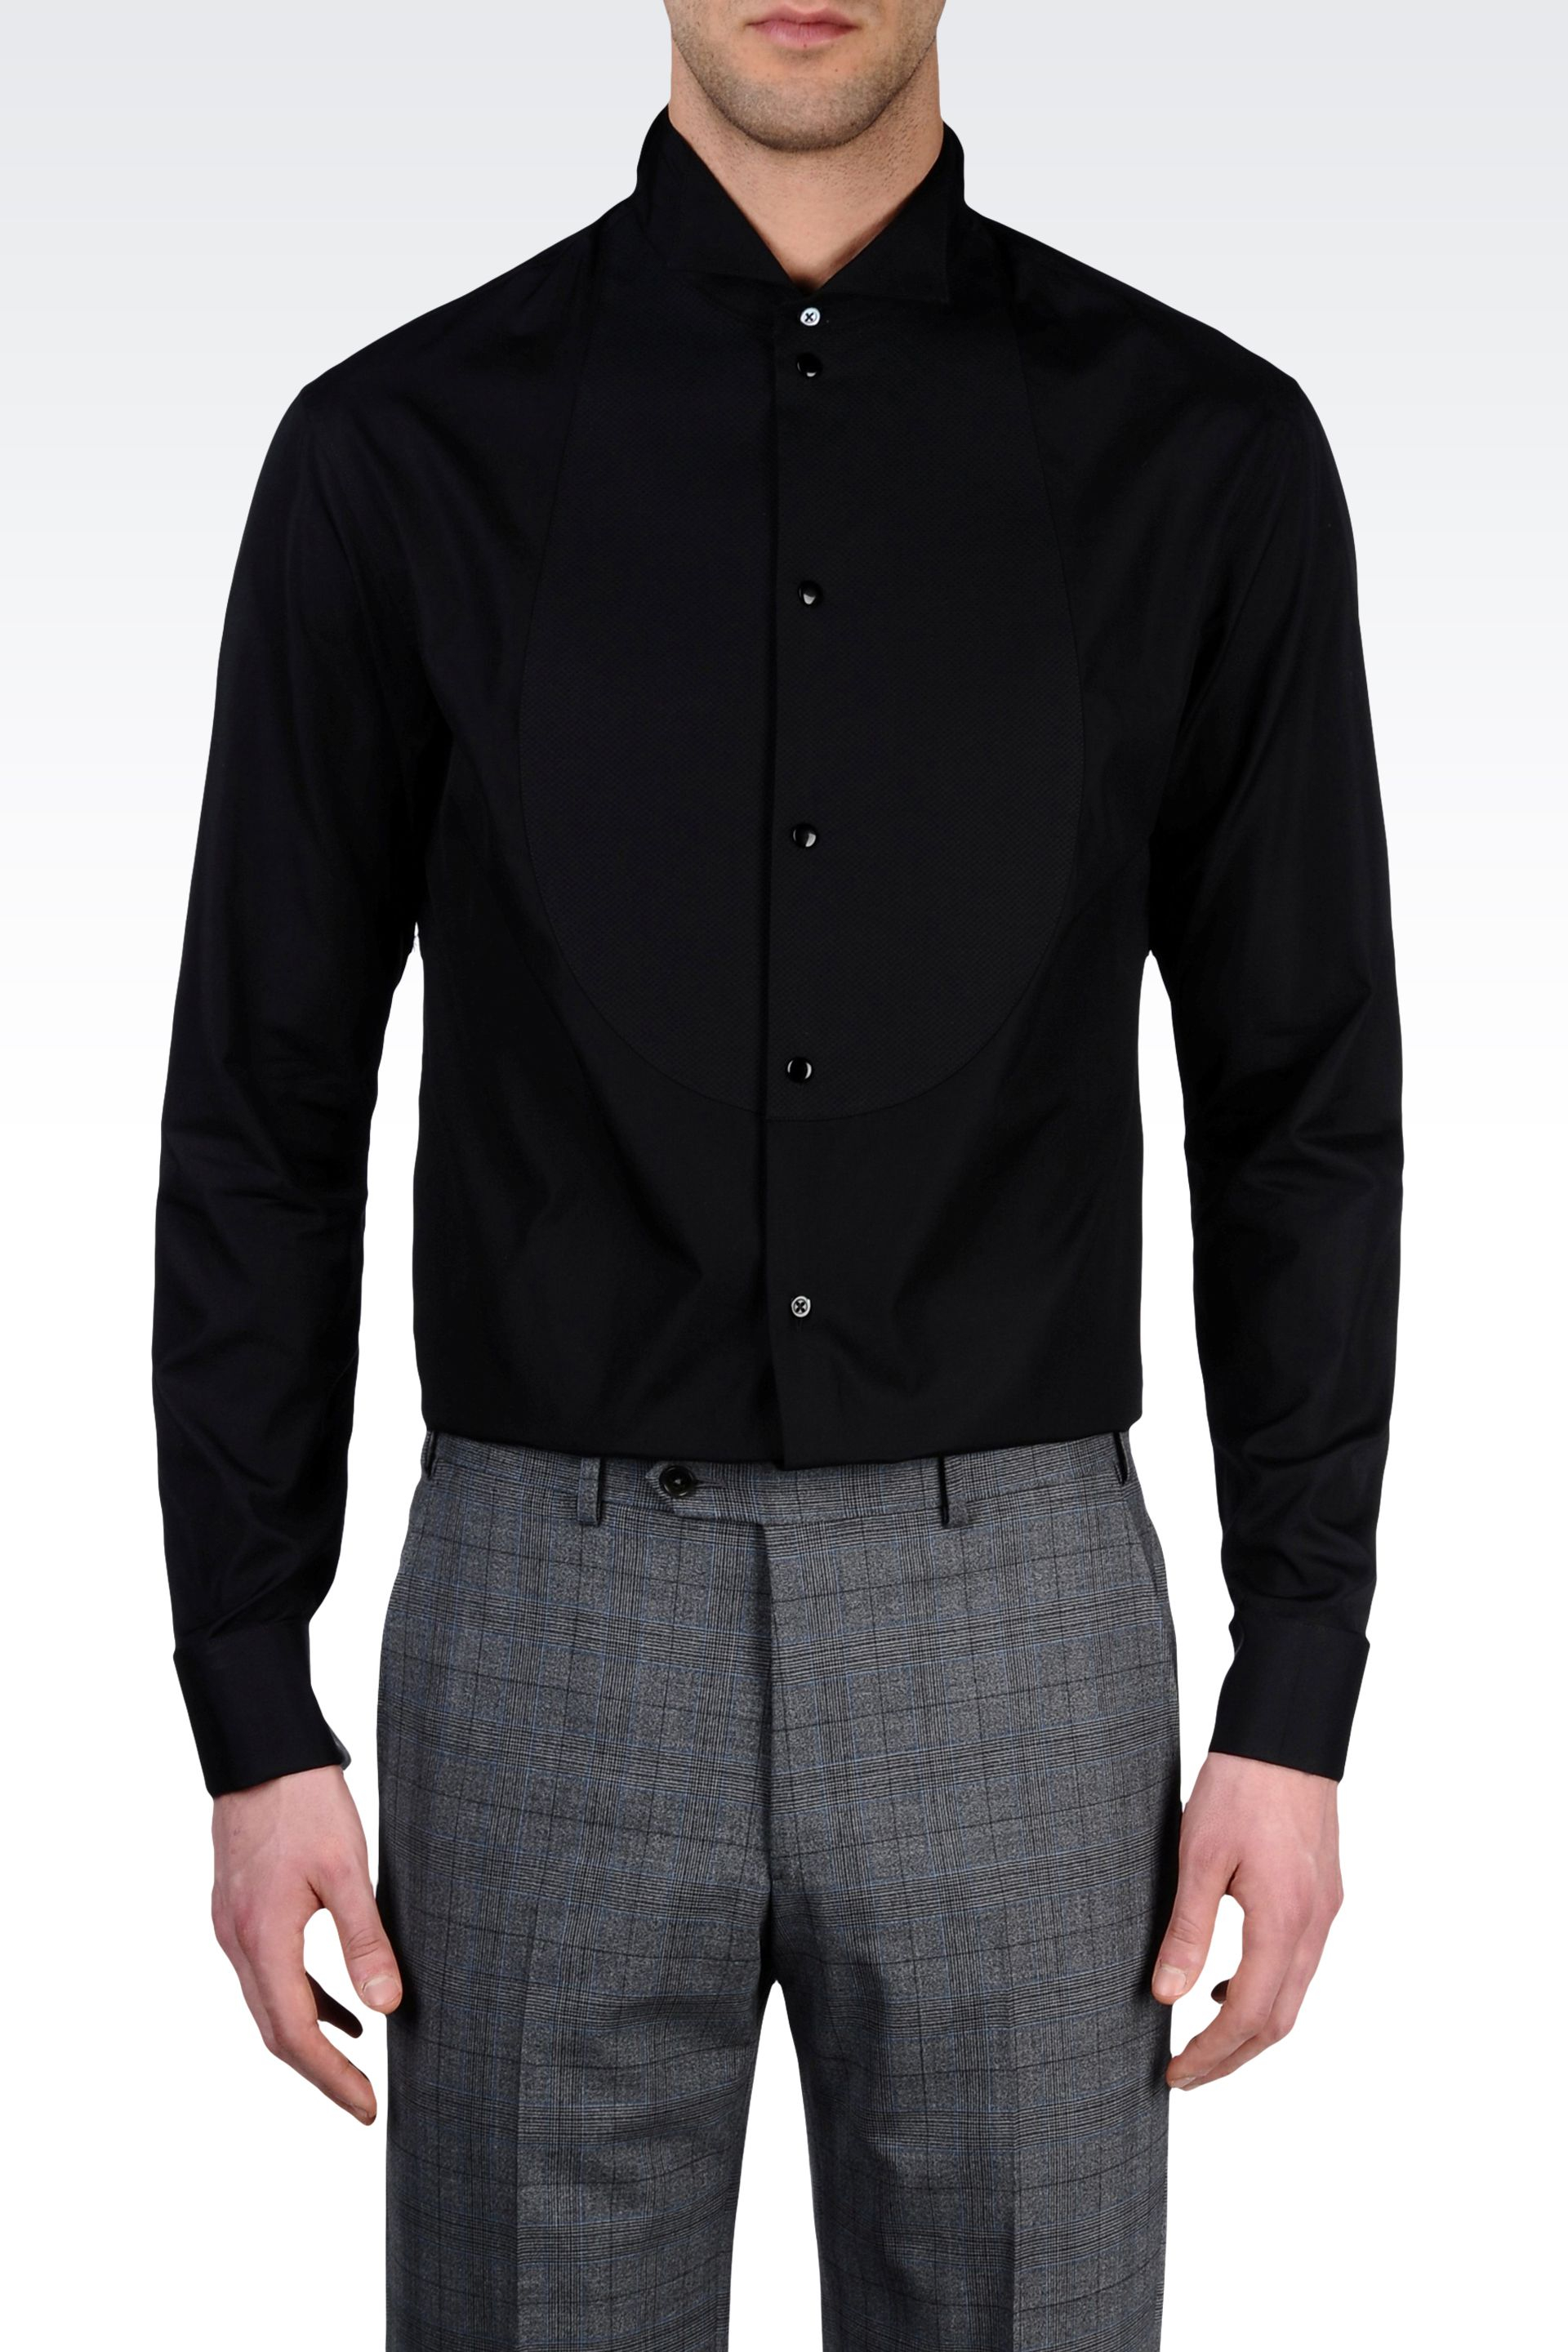 Armani Dress Shirt with Butterfly Collar in Black for Men ...